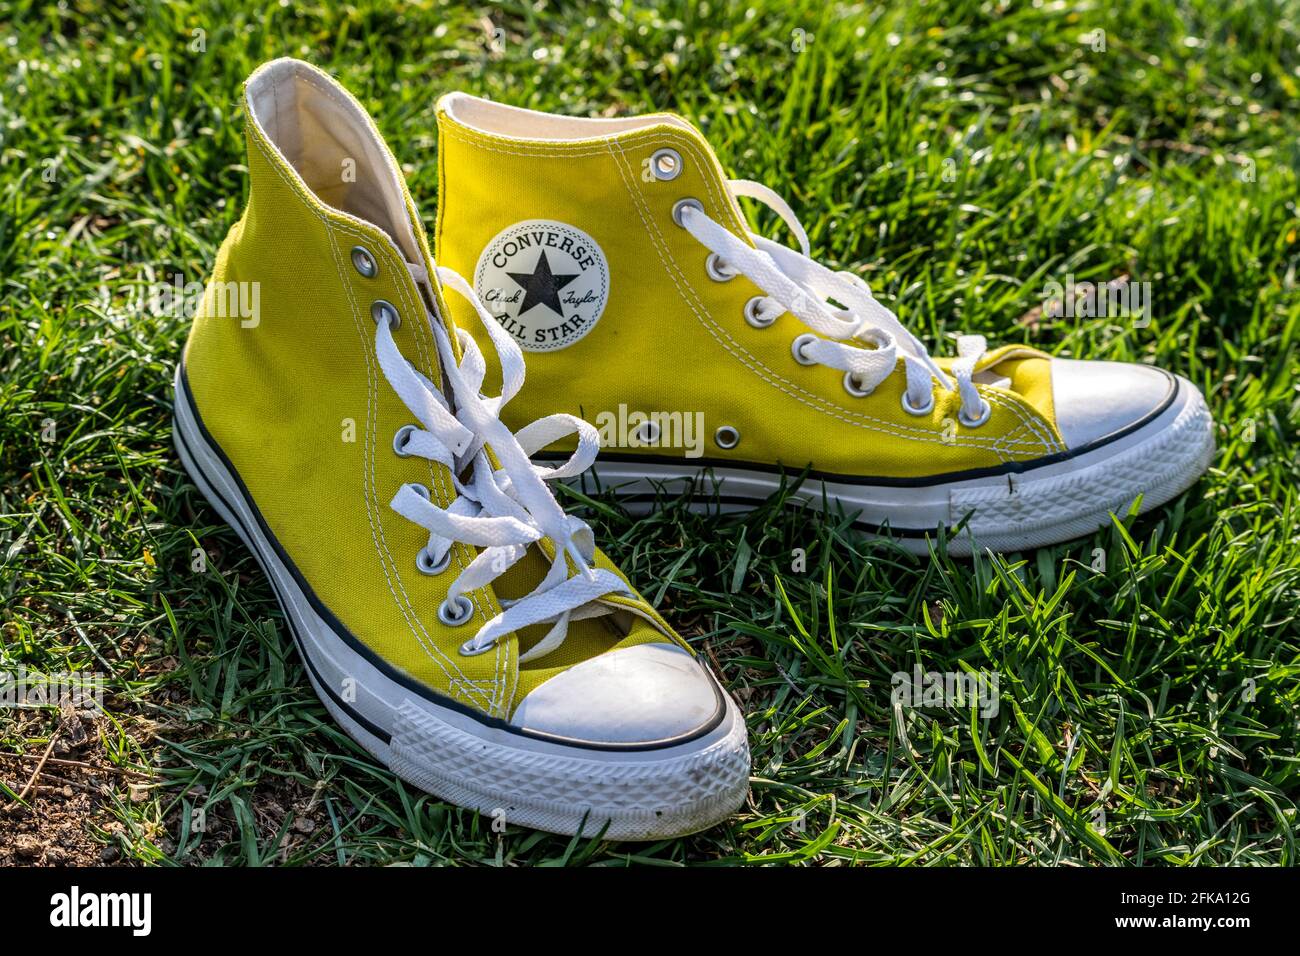 bright yellow converse high tops